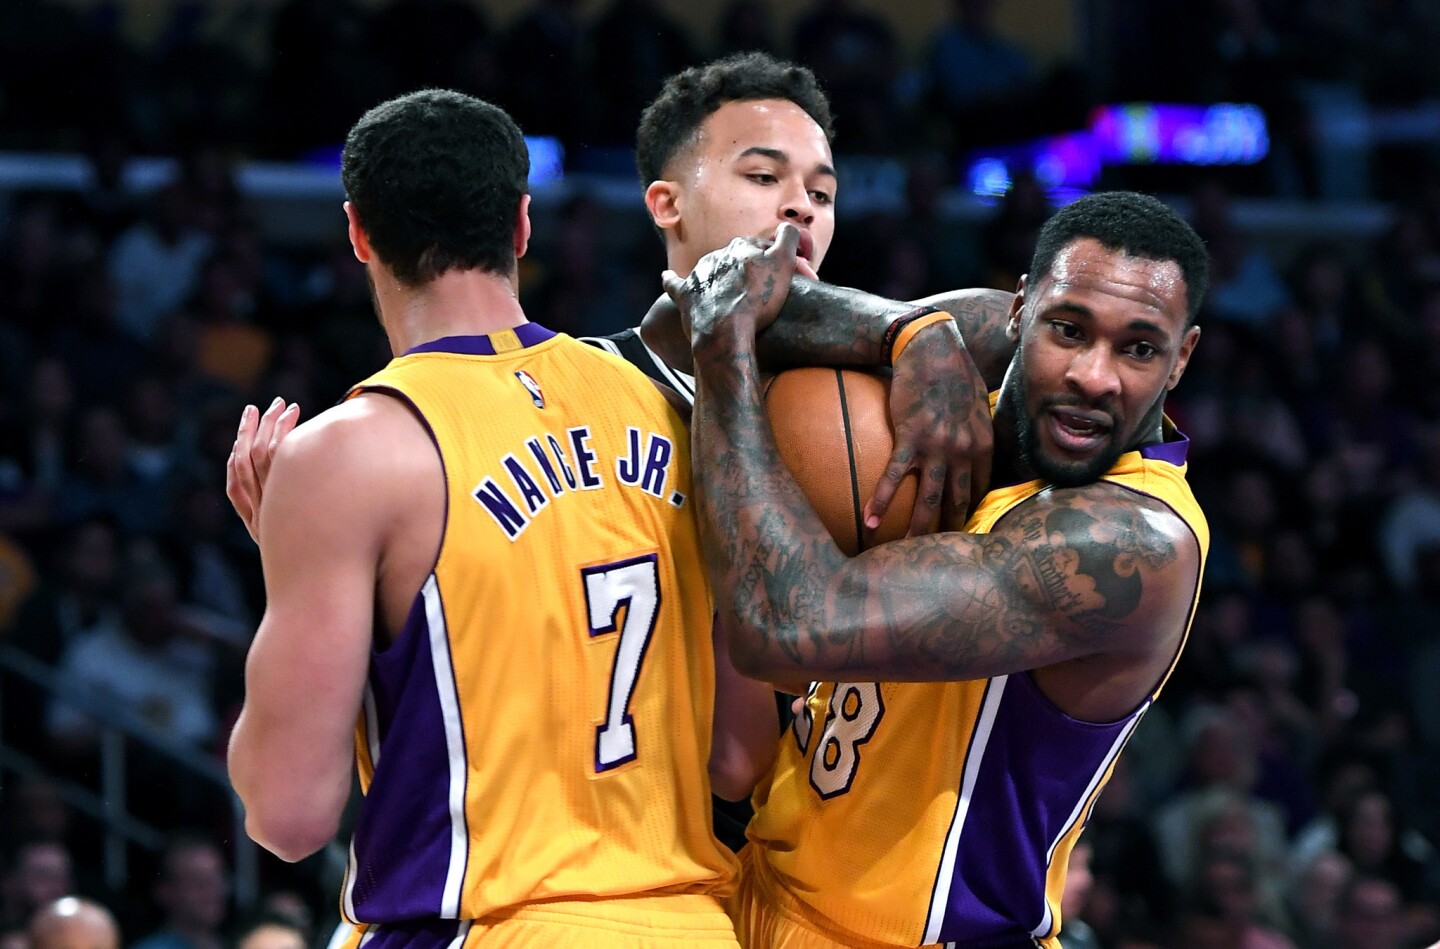 Lakers center Tarik Black grabs a rebound from teammate Larry Nance Jr. and Spurs guard Danny Green at Staples Center on Nov. 18.